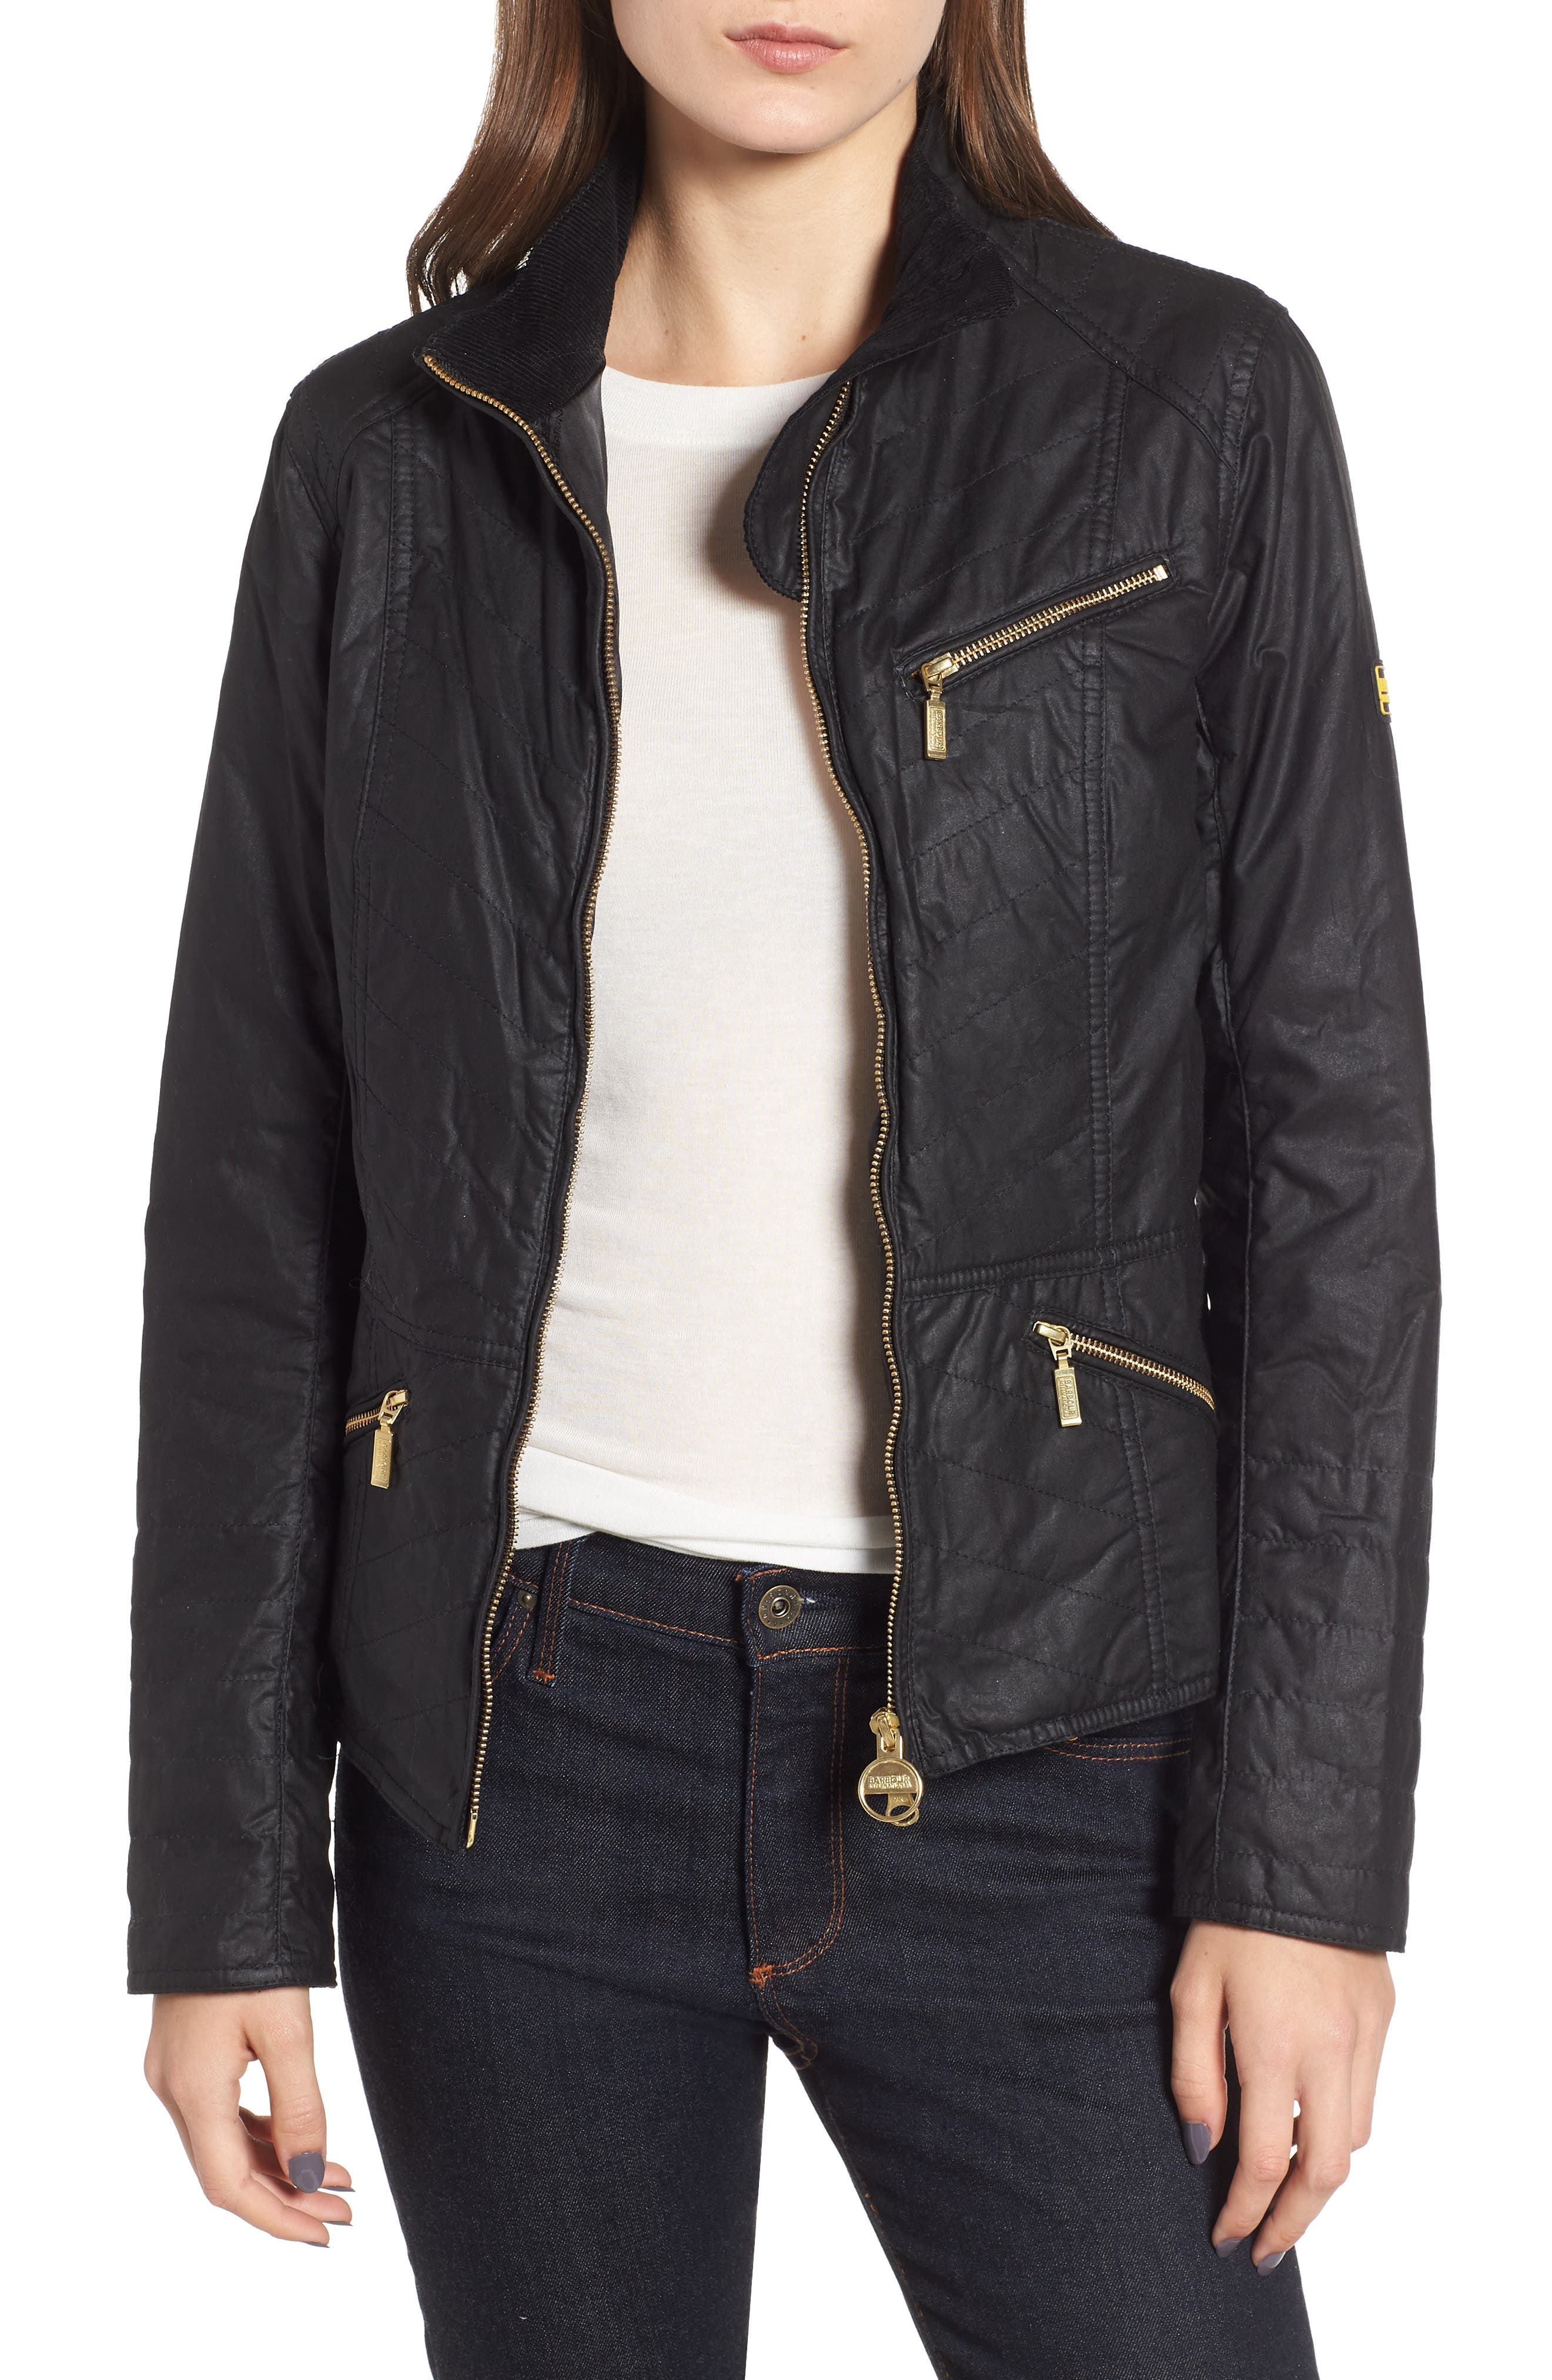 ladies barbour jackets house of fraser